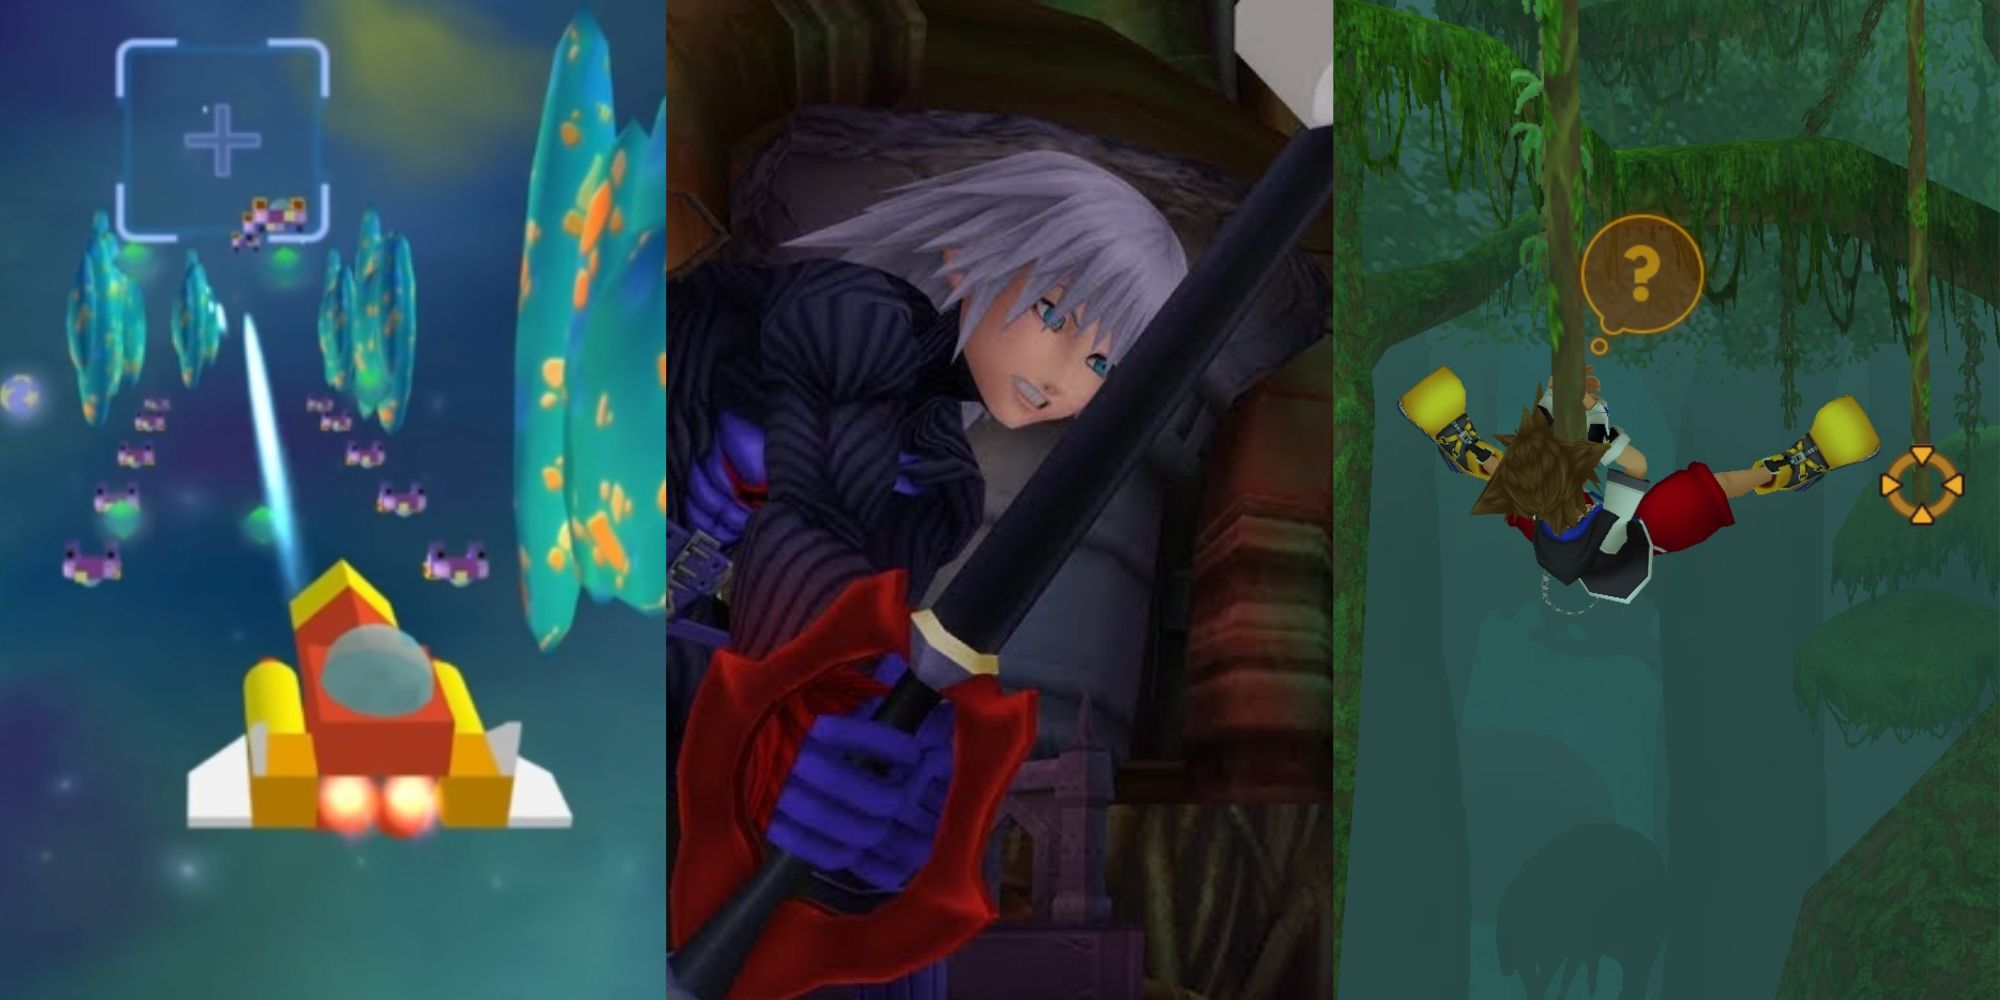 Relatable moments in Kingdom Hearts